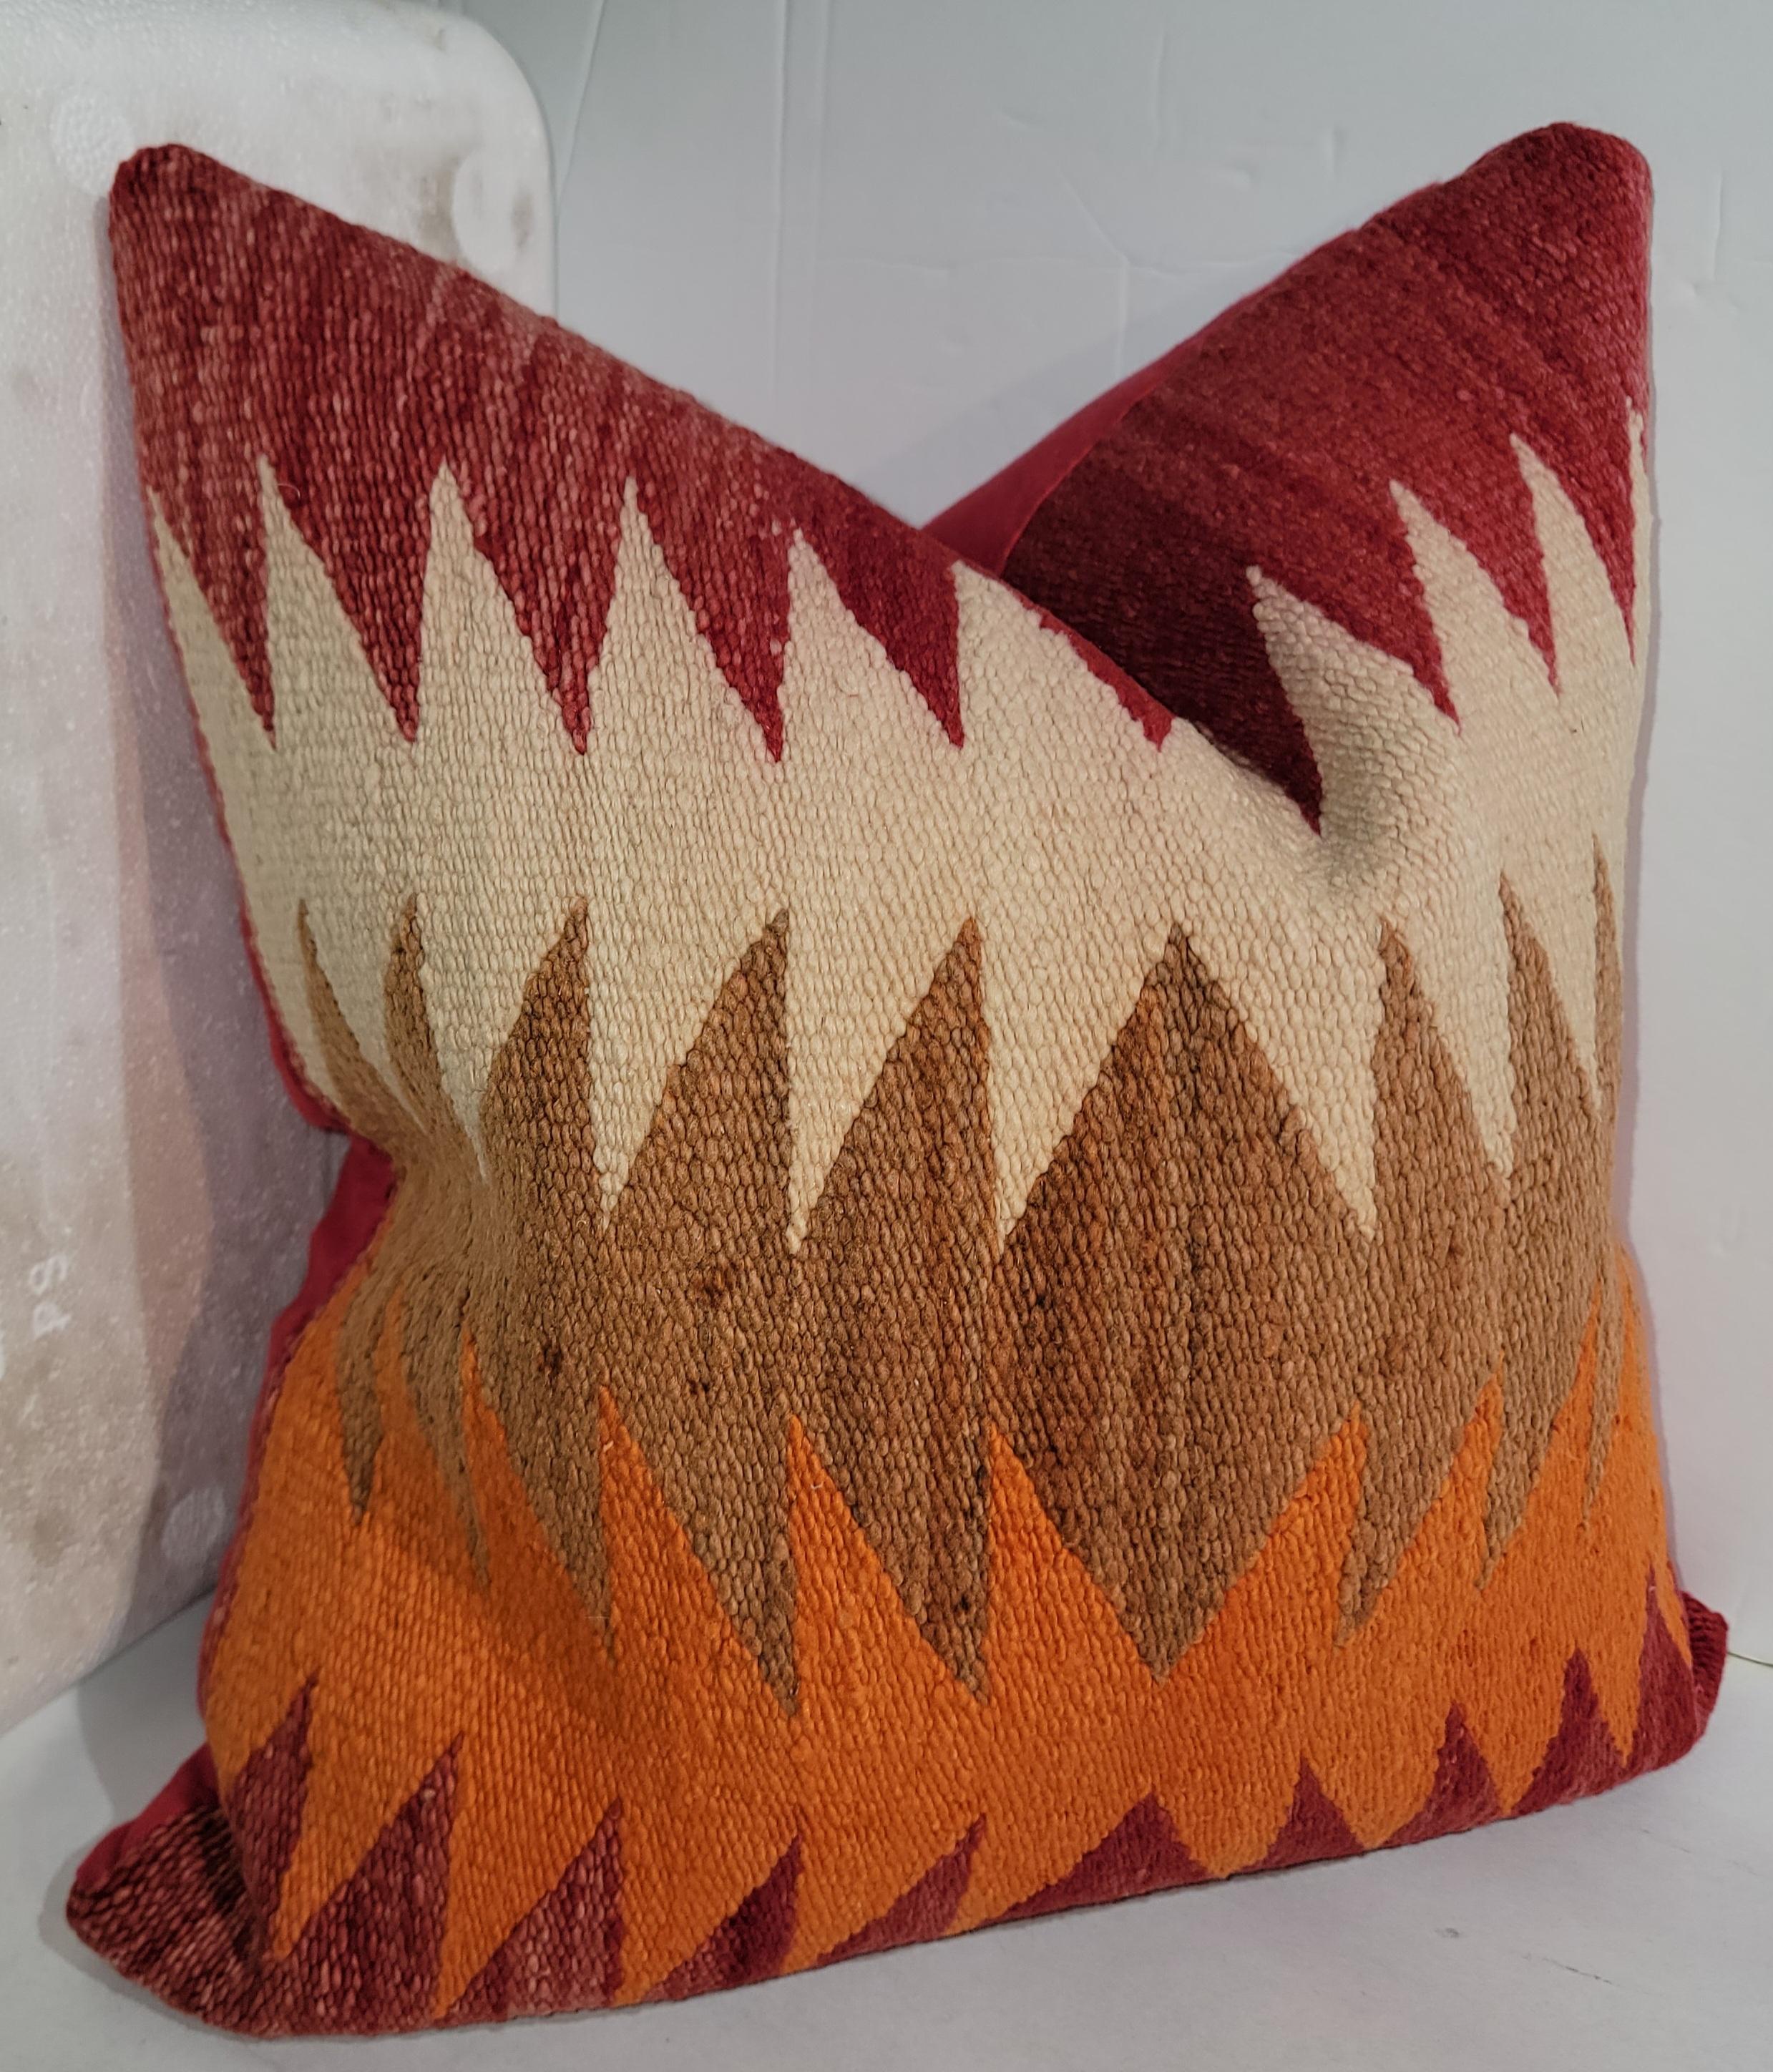 Navajo Jigsaw pattern pillow with great color red flame style jigsaw with unusual red, beige and orange color. This Pillow has been fitted wit ha down and feather insert.